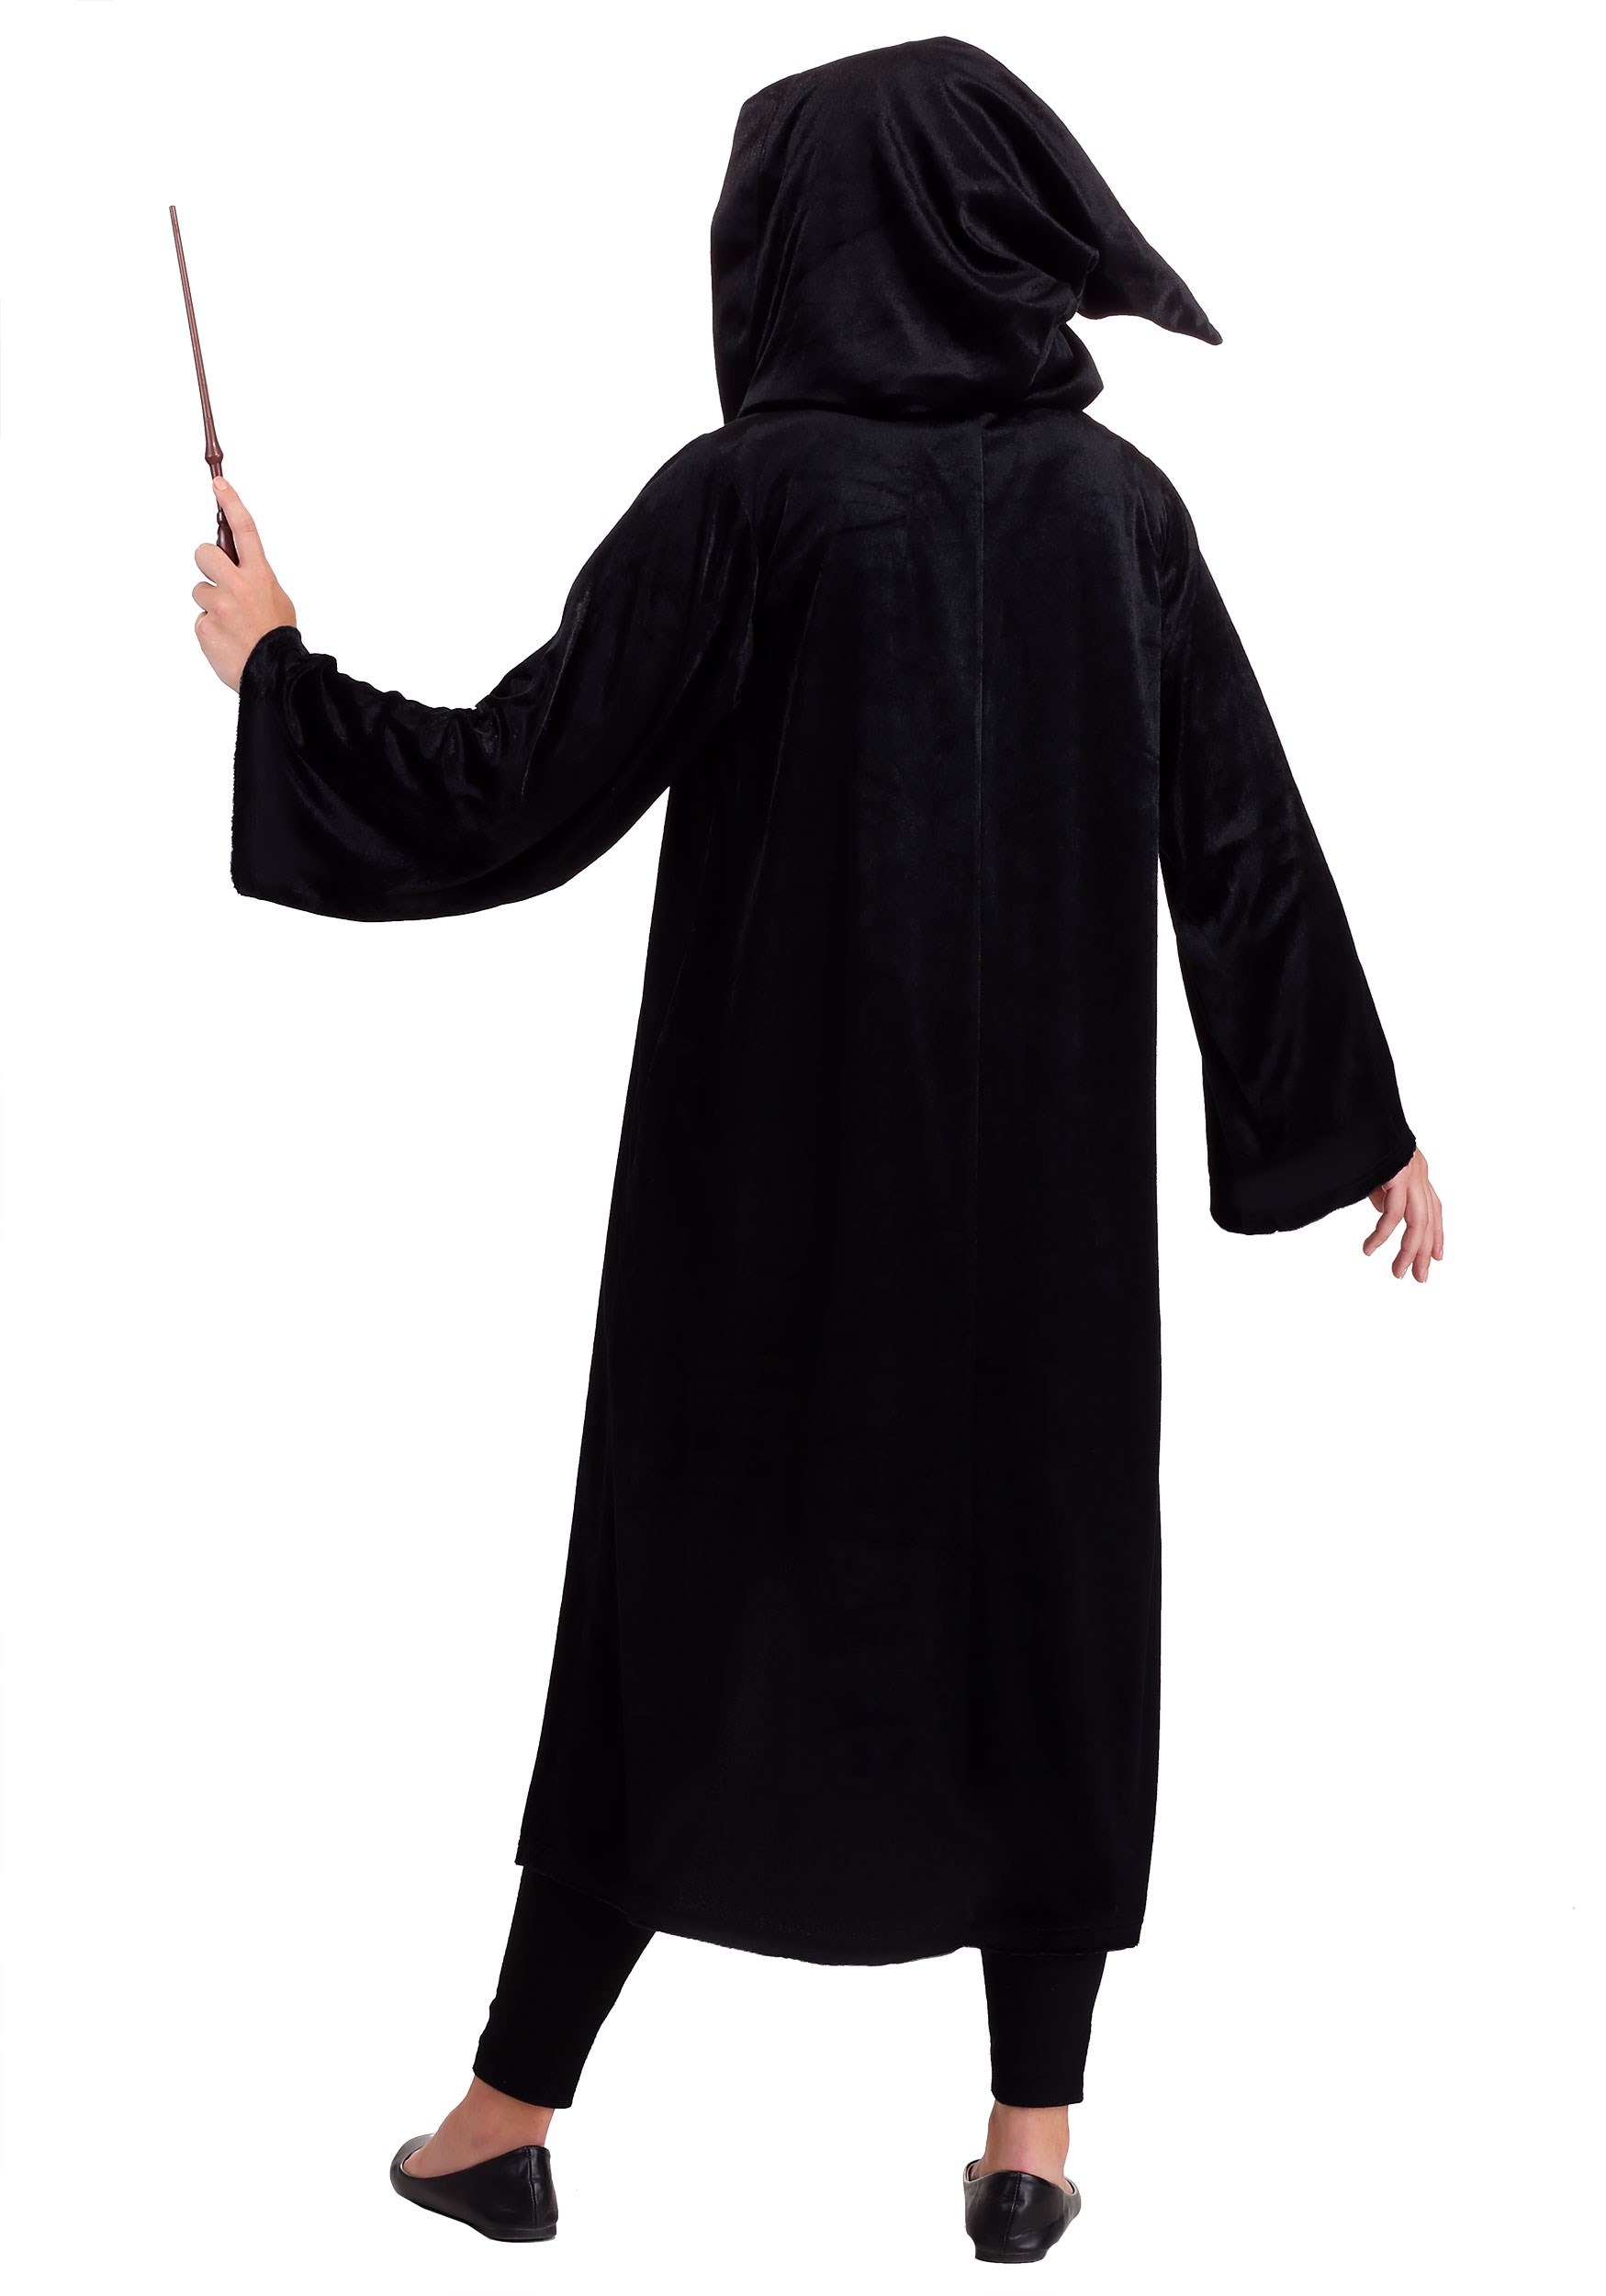 Adult Harry Potter Plus Size Deluxe Slytherin Robe